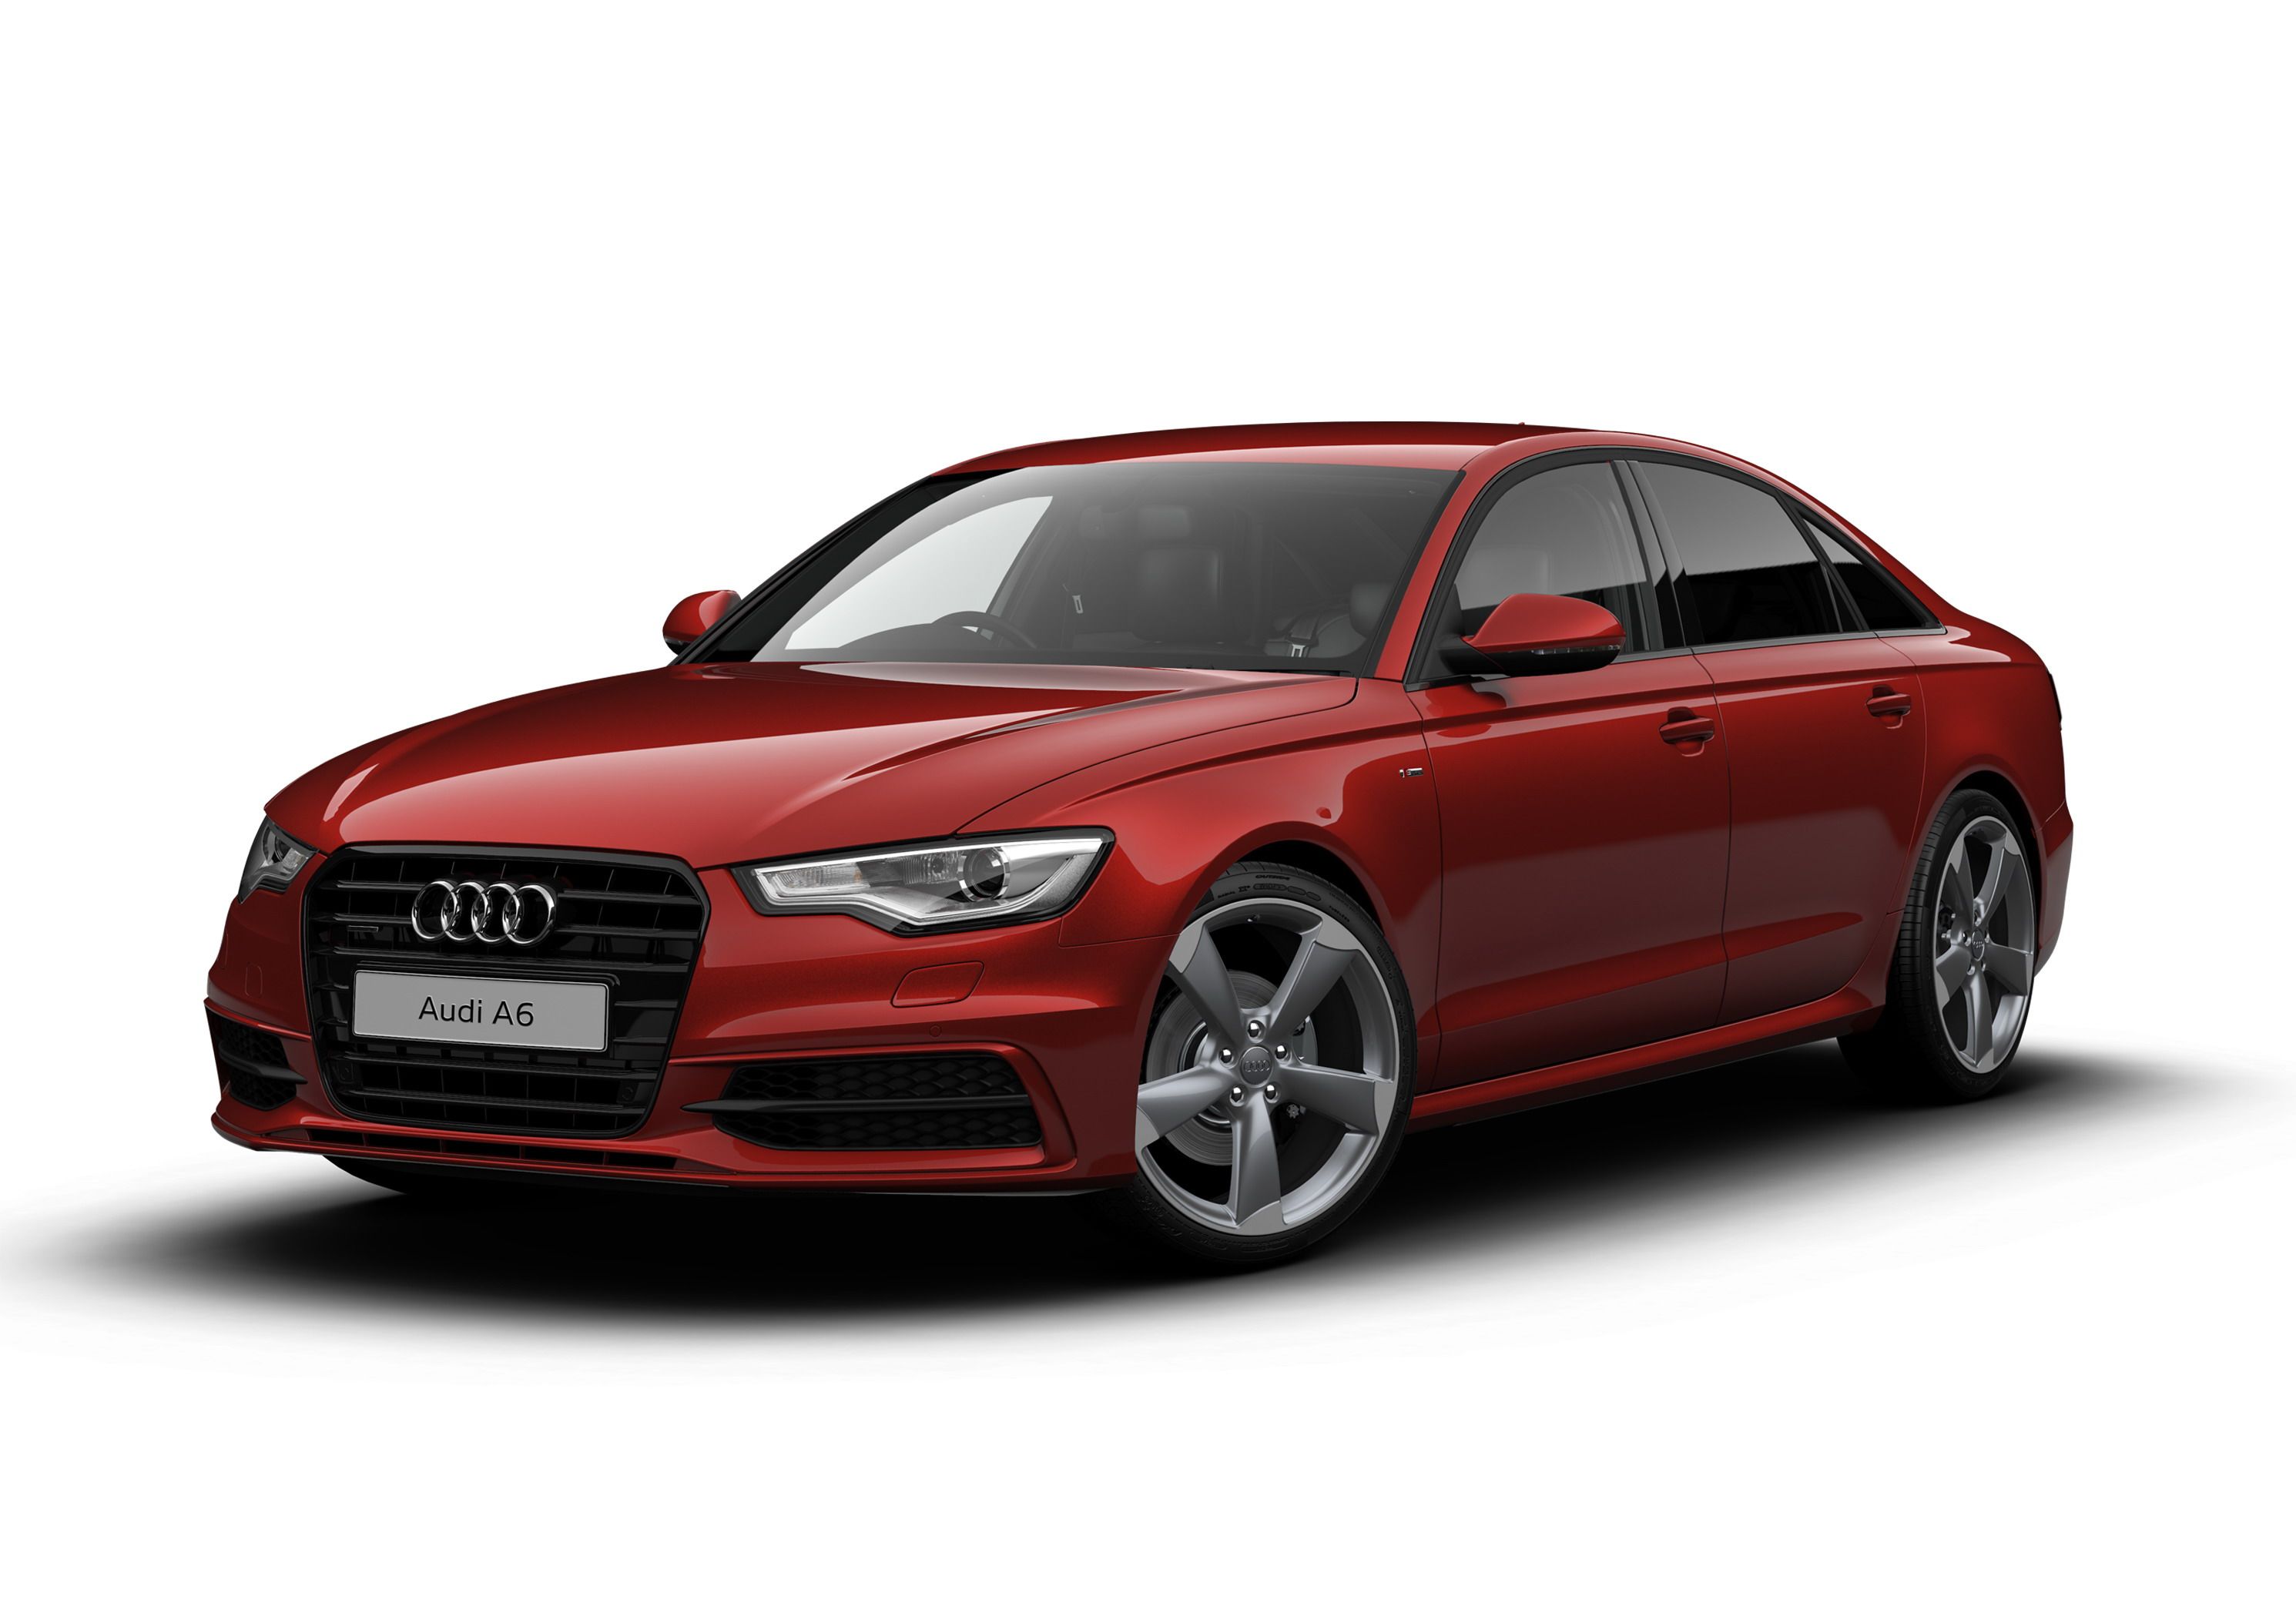 2013 Audi A6 and A7 Black Edition